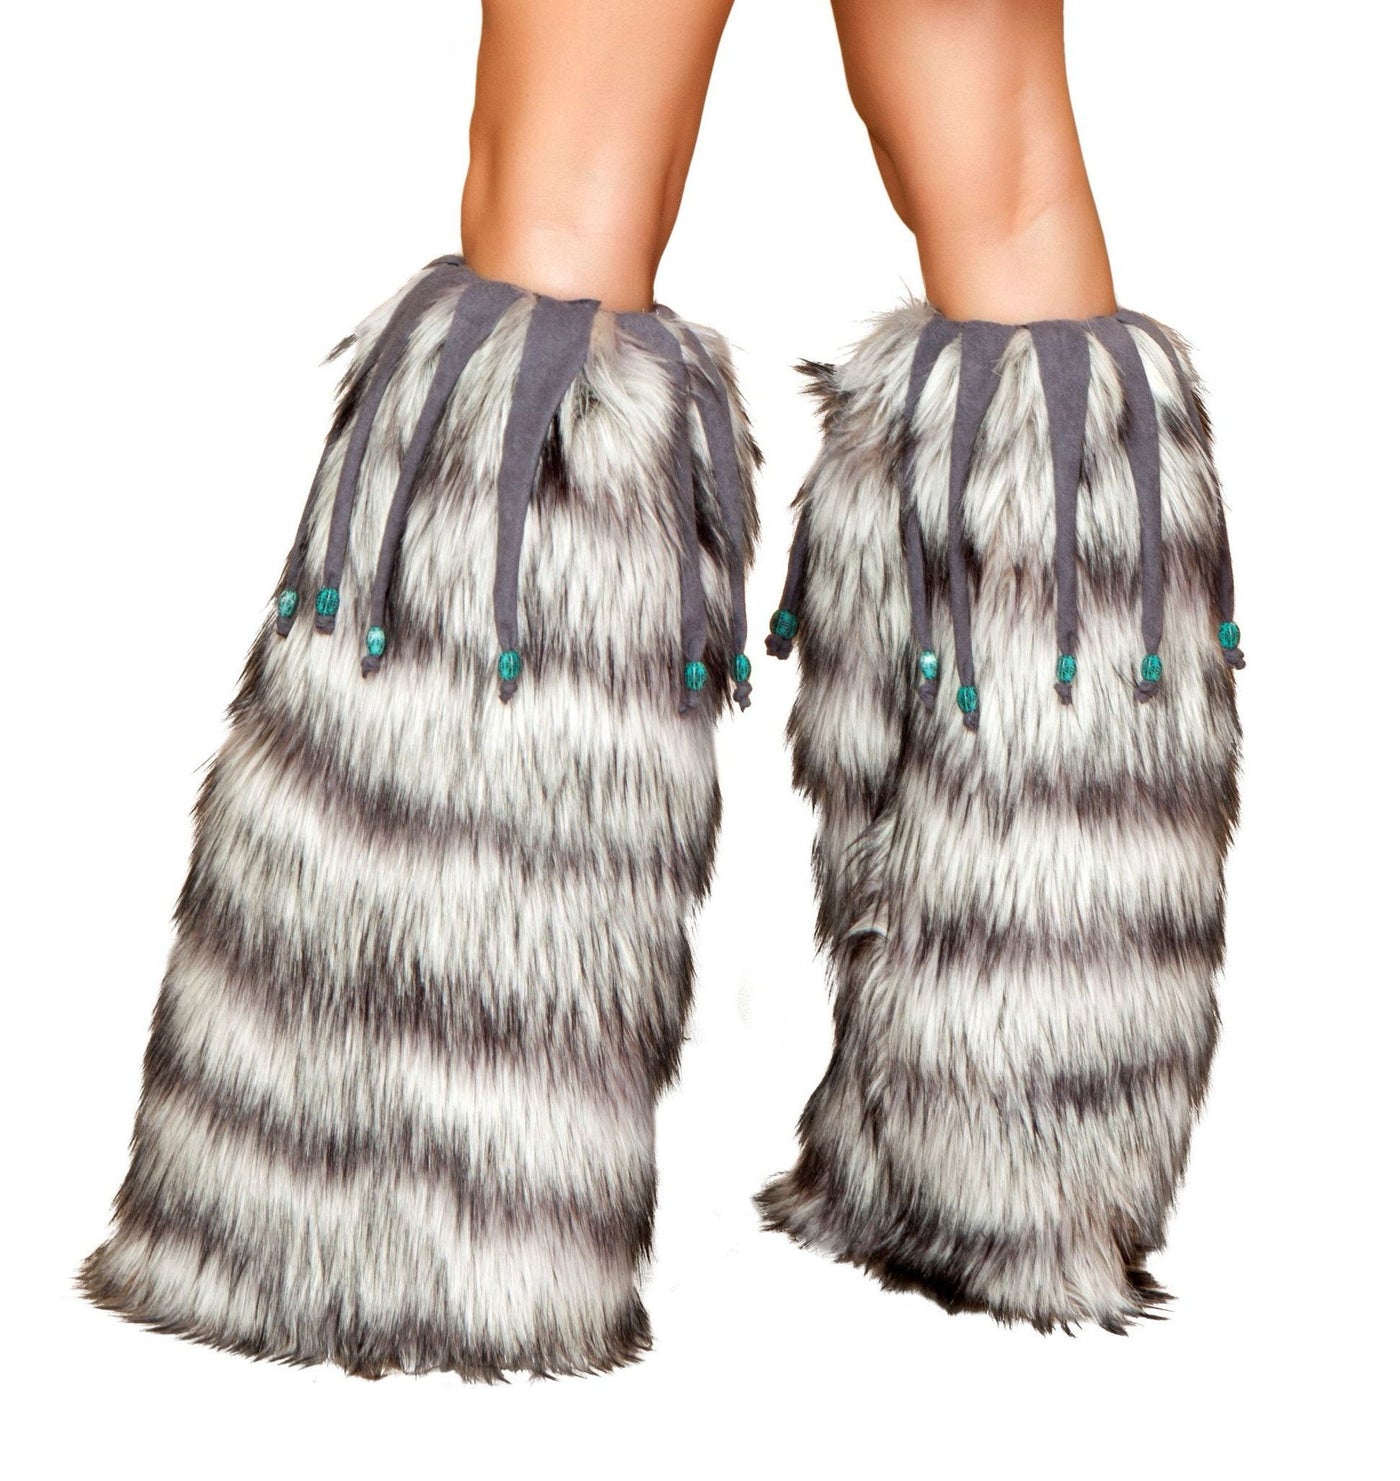 Buy Pair of Fur Leg Warmers with Fringe and Bead Details from RomaRetailShop for 36.75 with Same Day Shipping Designed by Roma Costume LW4427-AS-O/S